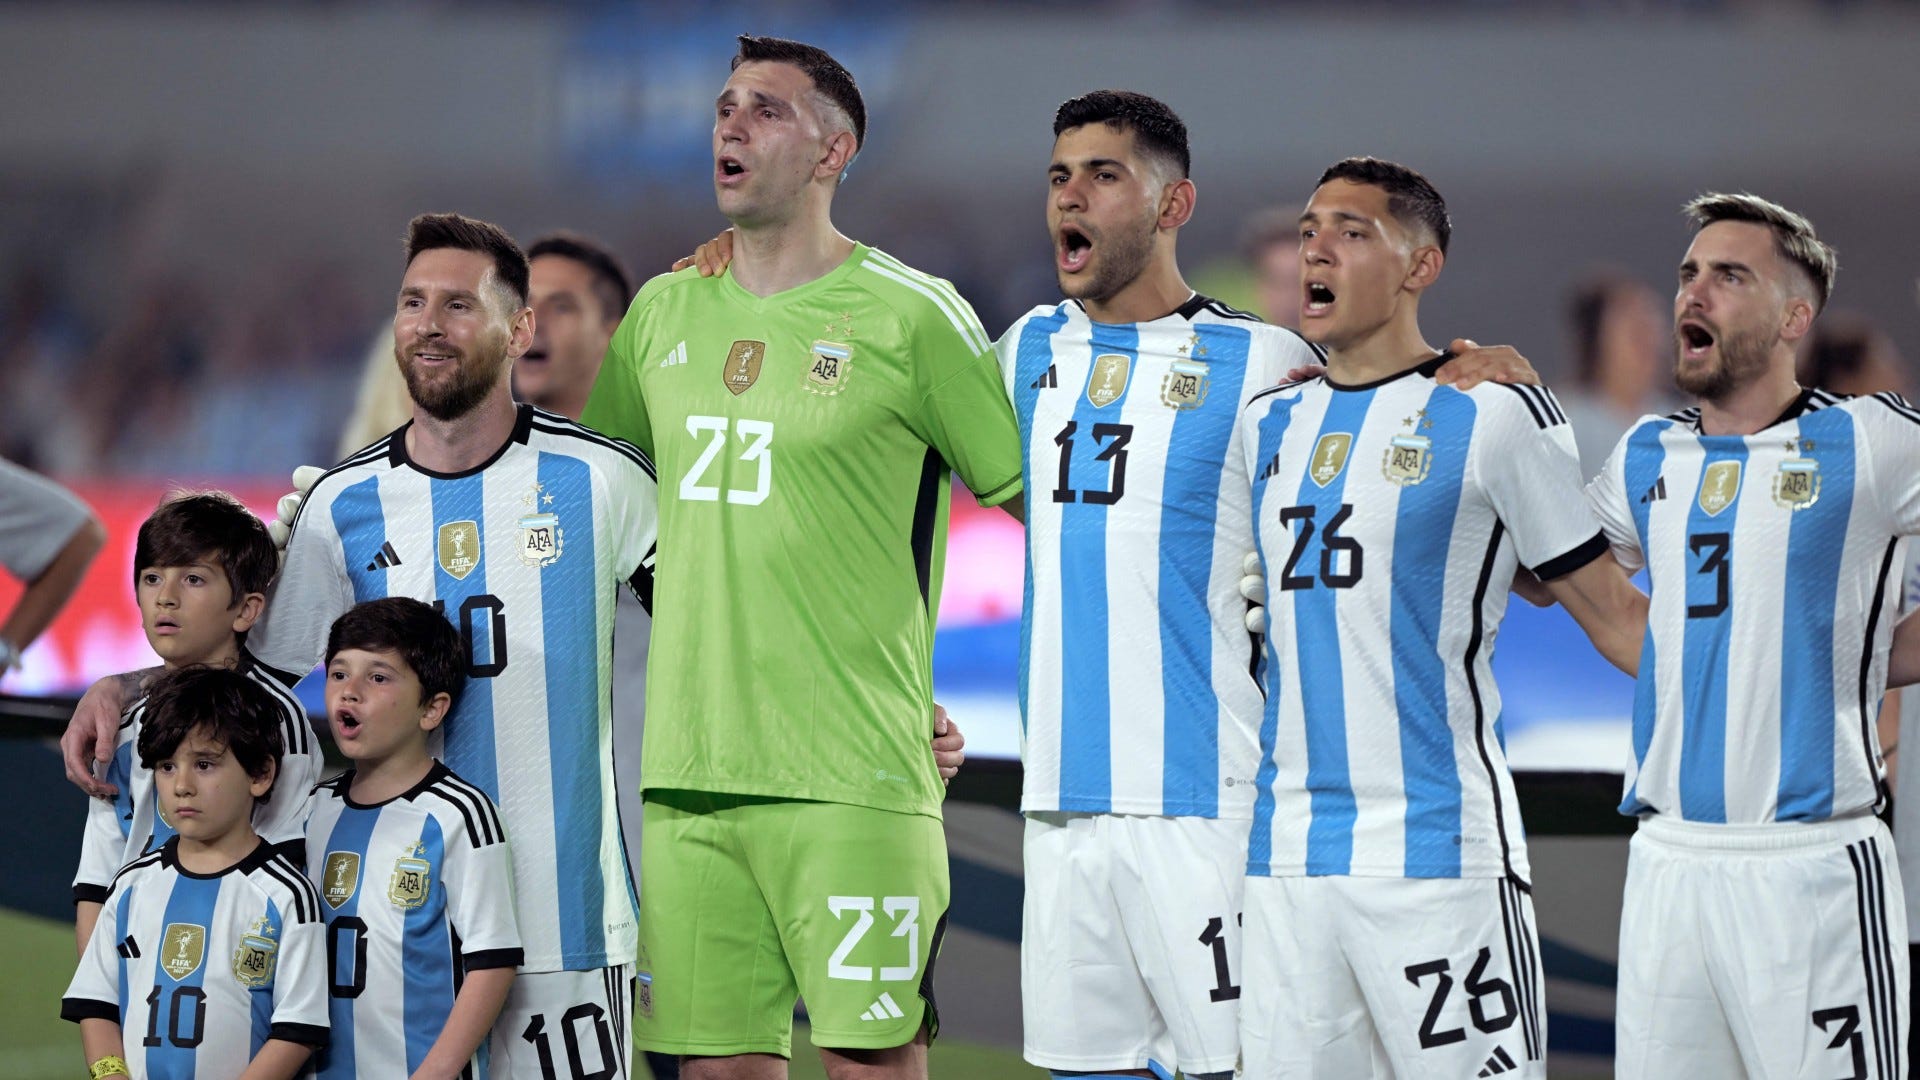 WATCH: Lionel Messi in tears as Argentina welcome back World Cup heroes in first match since triumph in Qatar